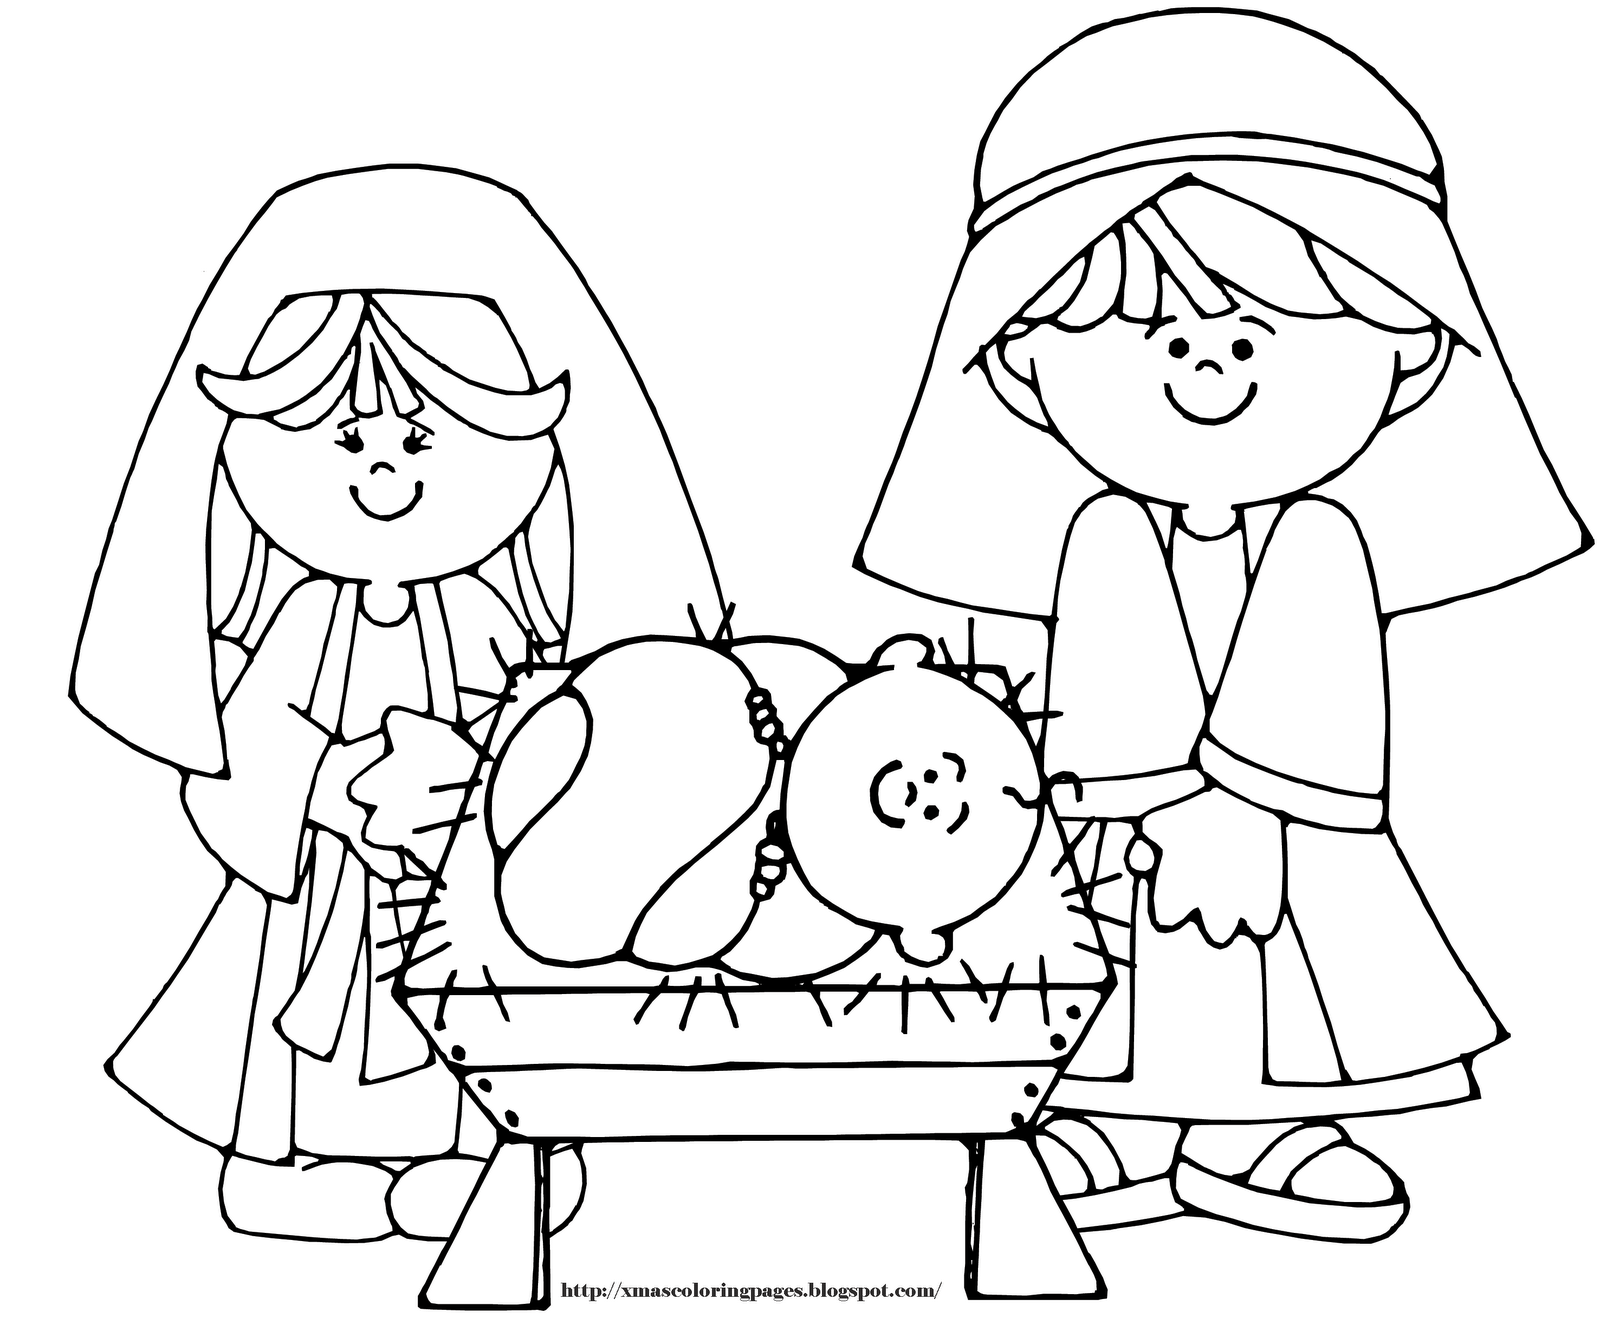 African American Jesus Coloring Pages - Coloring Pages For All Ages